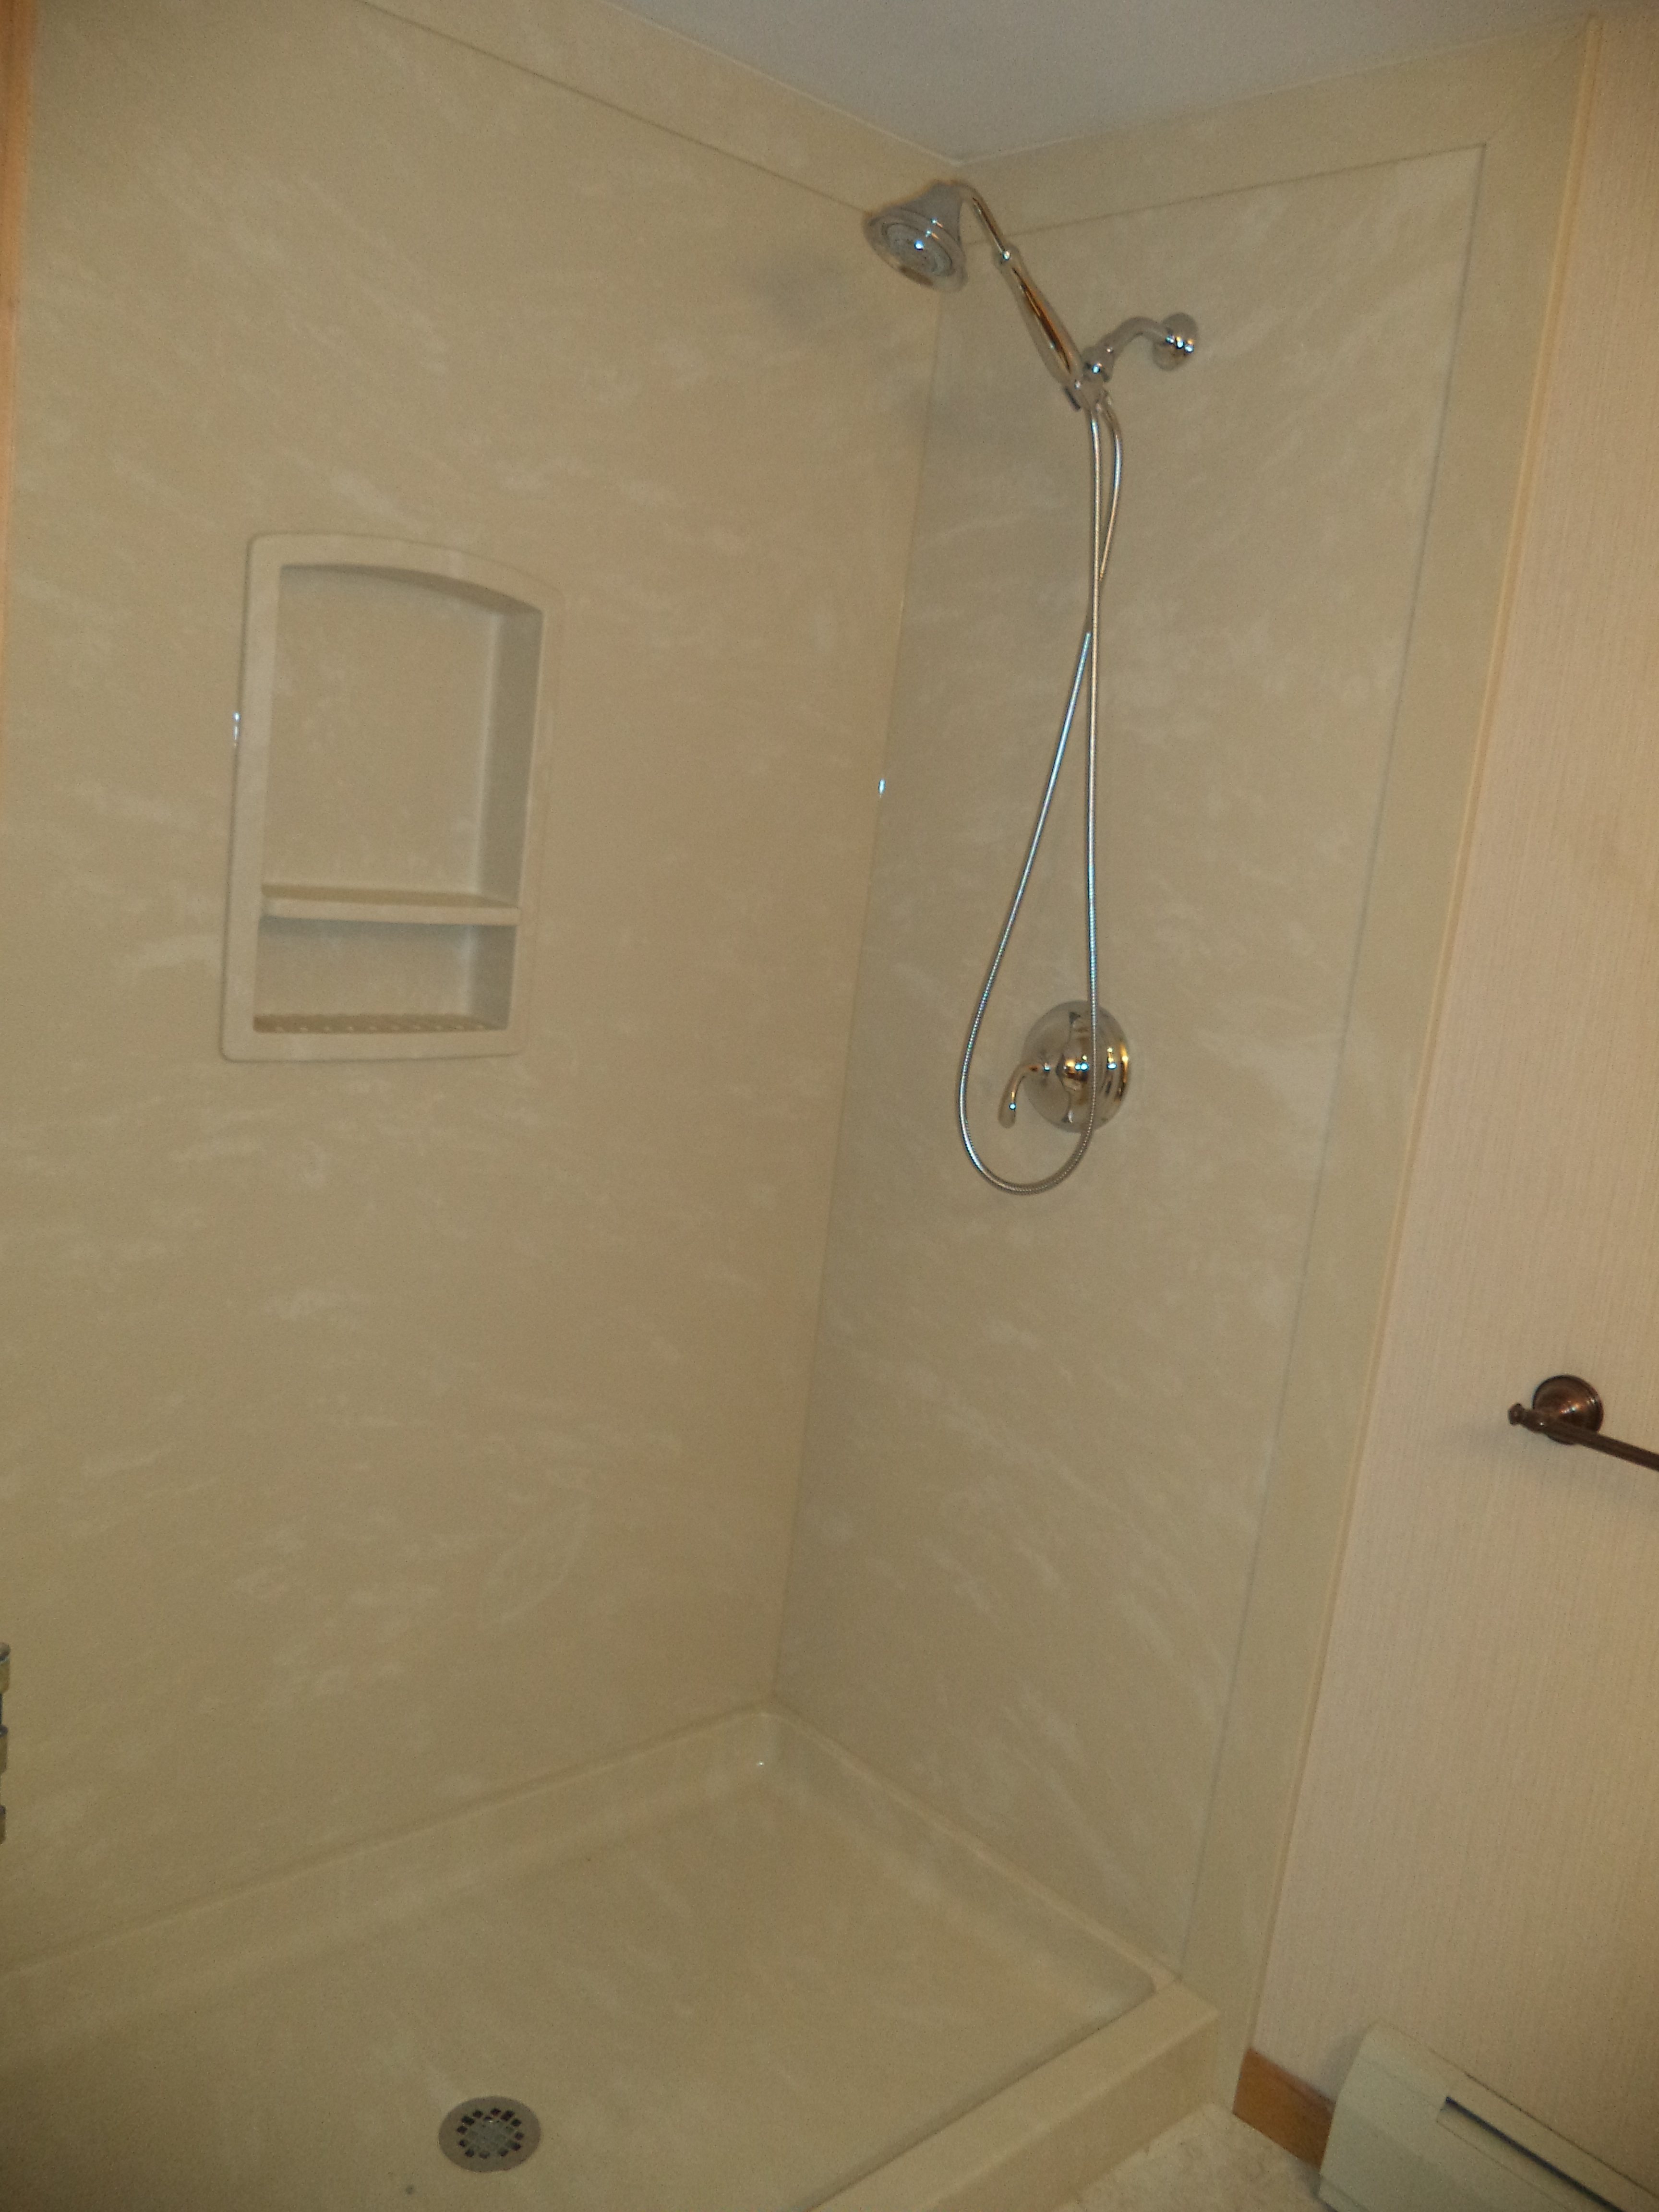 Swanstone Shower Installation Madbury Nh Nh Bath Builders pertaining to proportions 3456 X 4608